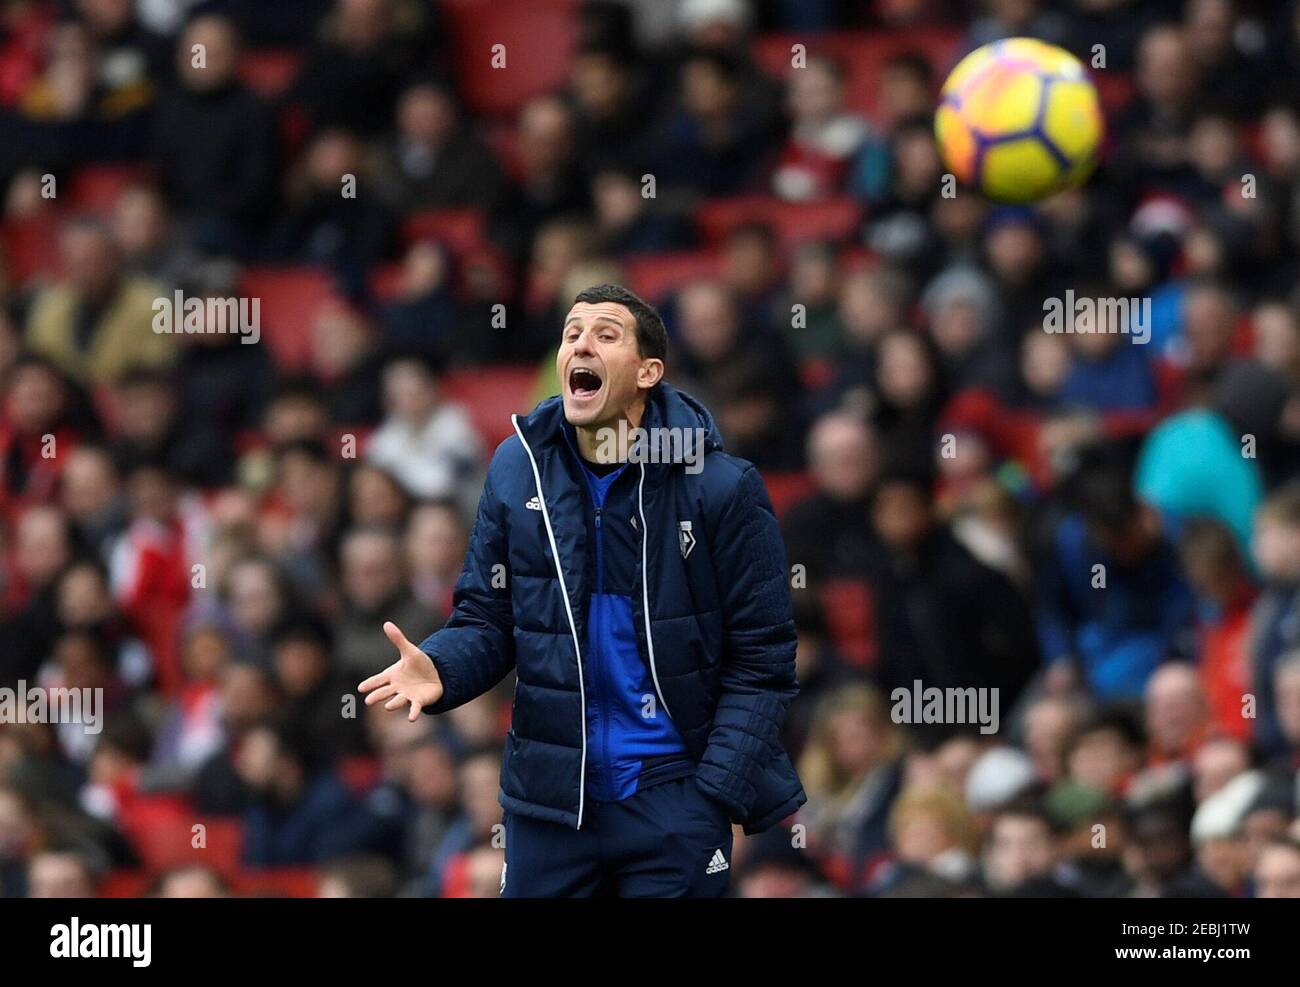 Soccer Football - Premier League - Arsenal vs Watford - Emirates Stadium, London, Britain - March 11, 2018   Watford manager Javi Gracia          Action Images via Reuters/Tony O'Brien    EDITORIAL USE ONLY. No use with unauthorized audio, video, data, fixture lists, club/league logos or 'live' services. Online in-match use limited to 75 images, no video emulation. No use in betting, games or single club/league/player publications.  Please contact your account representative for further details. Stock Photo